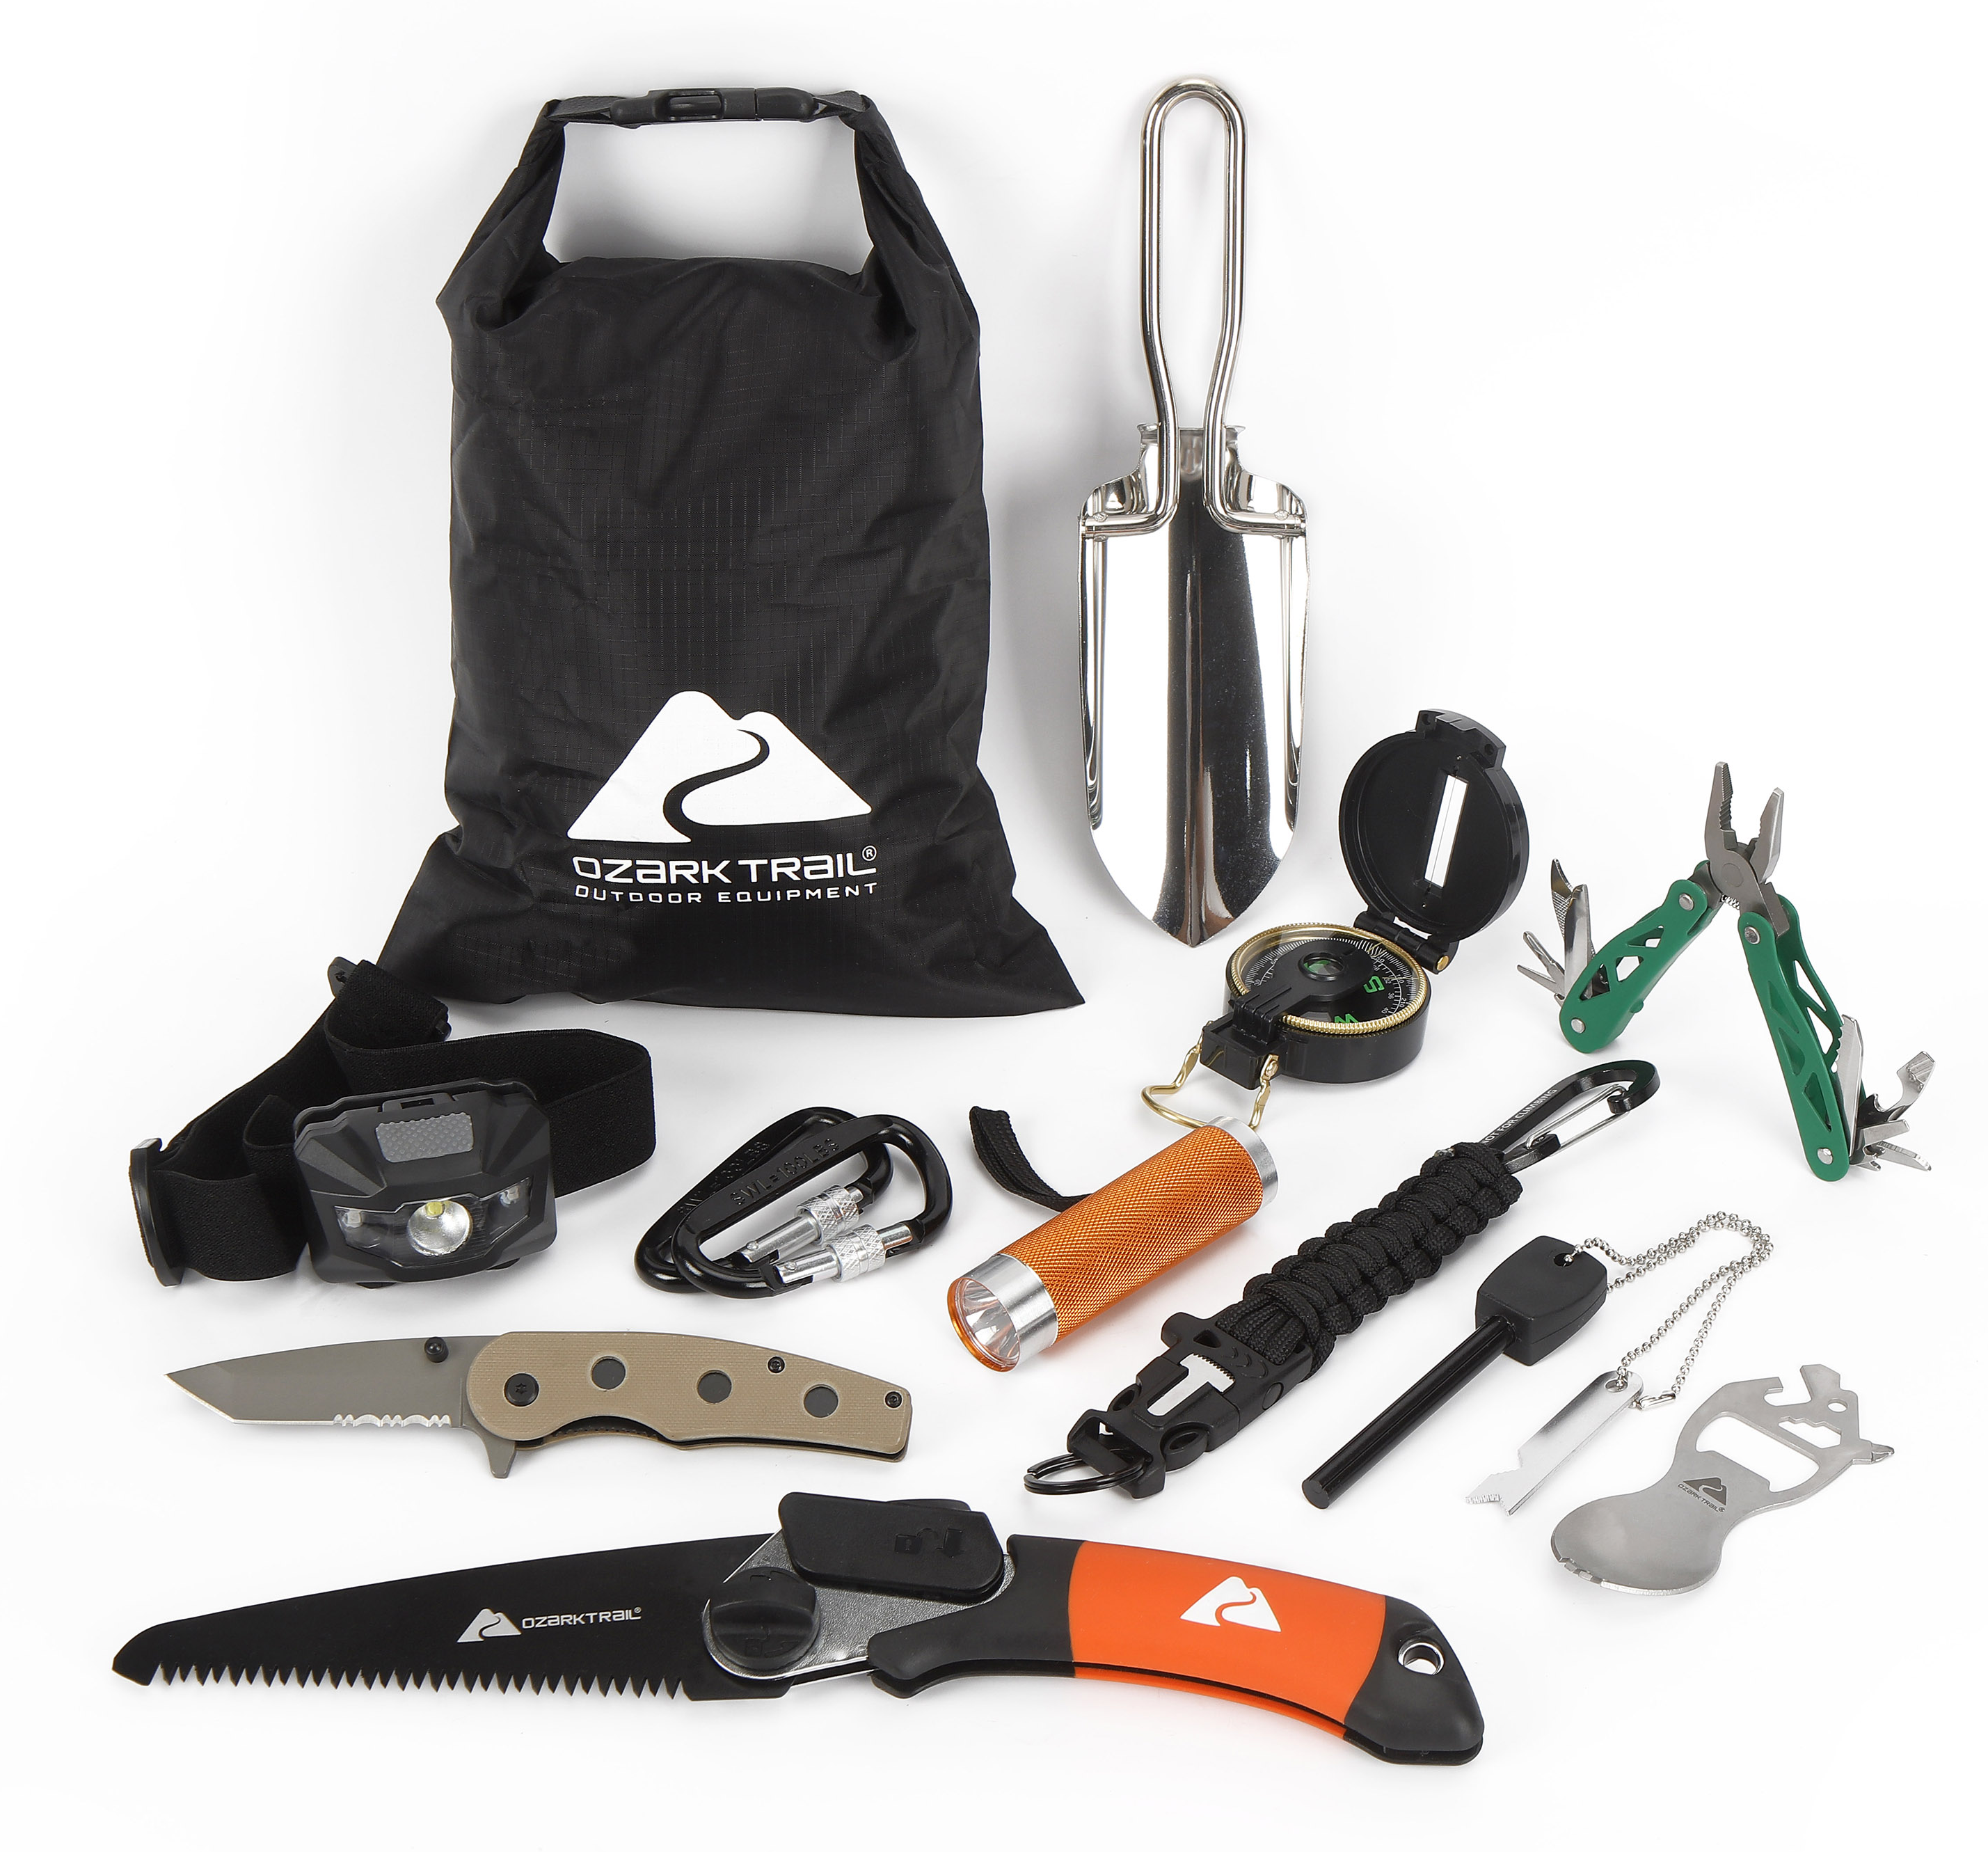 Ozark Trail Advent Calendar 2021 12 Outdoor Tools and Accessories